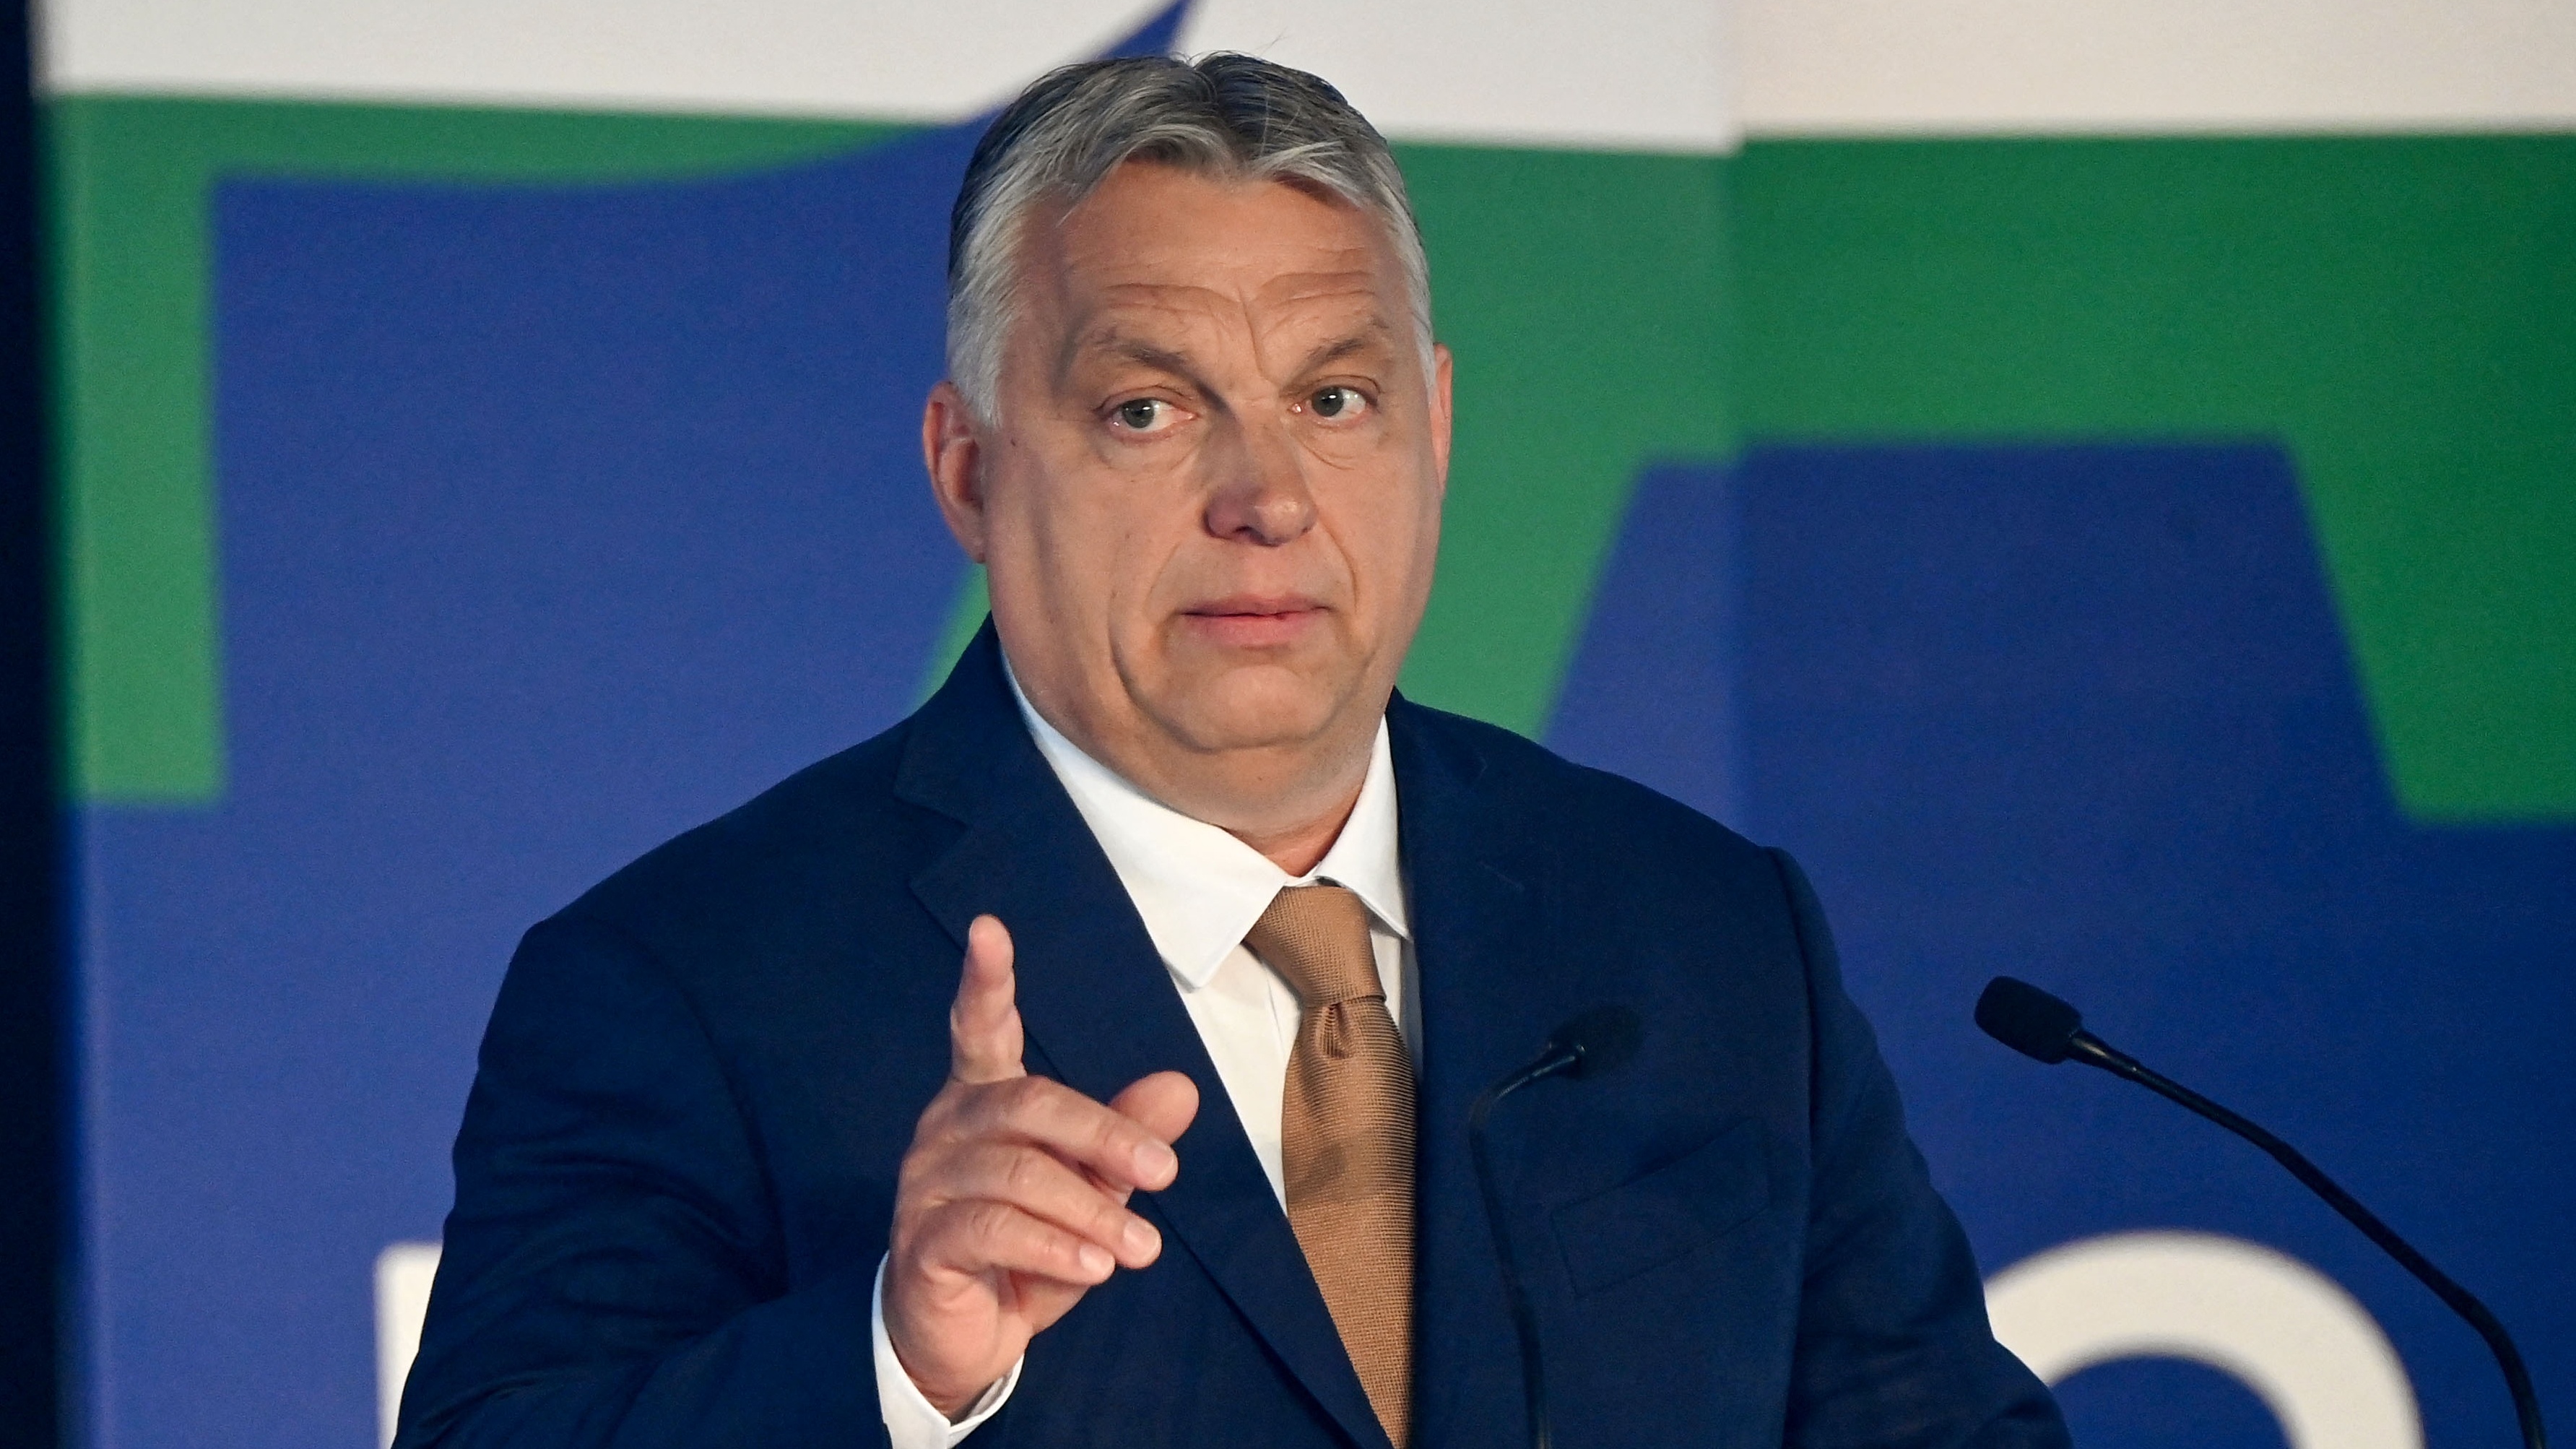 Viktor Orbán addresses the Conservative Political Action Conference in Budapest, Hungary